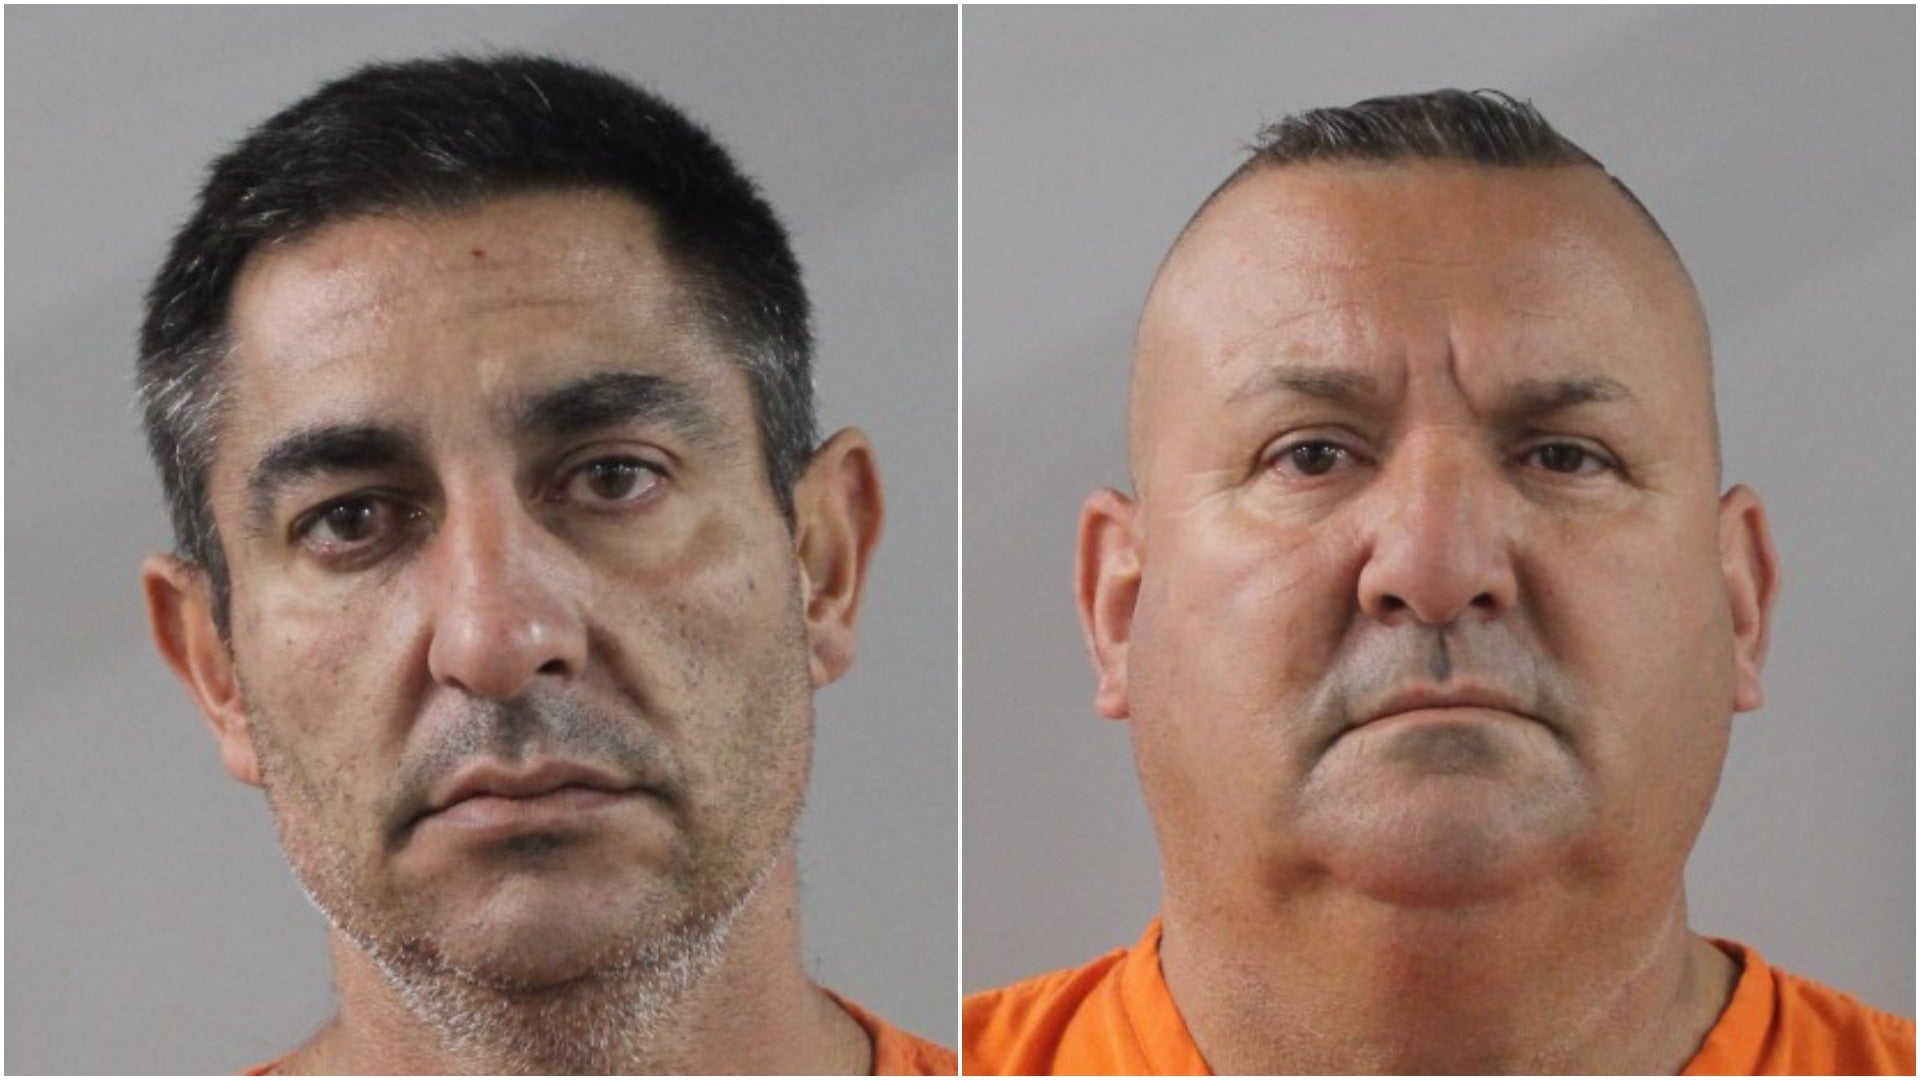 <p>Yulier Garcia-Martinez and Rogelio Llerena, of Orlando, allegedly attempted to use ‘homemade’ pulsar to hack fuel pump in Florida</p>